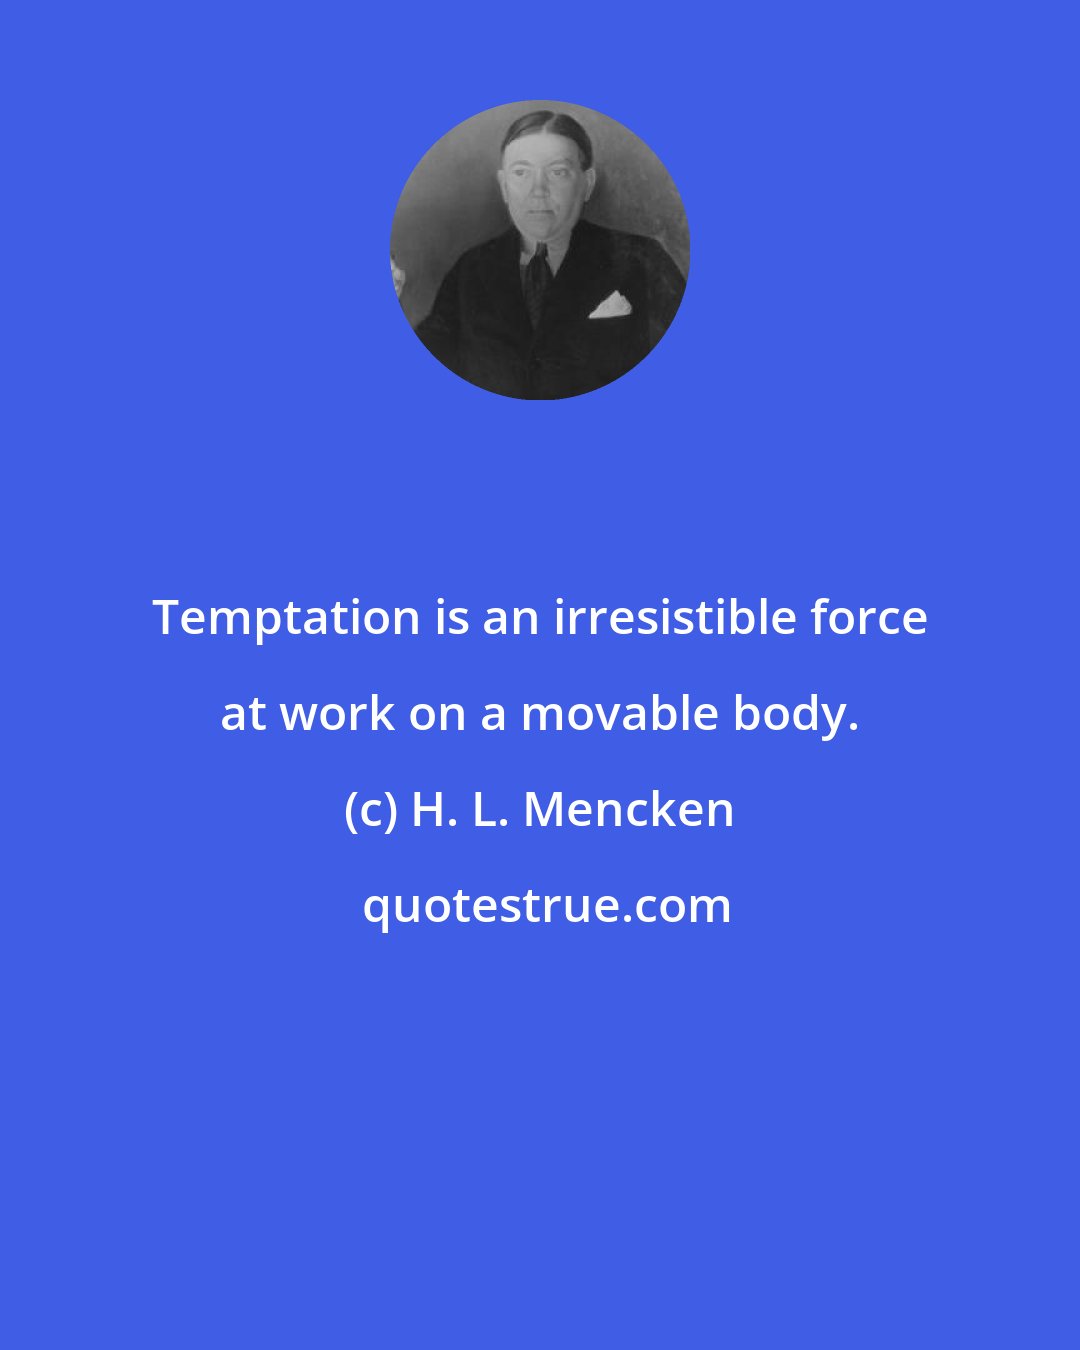 H. L. Mencken: Temptation is an irresistible force at work on a movable body.